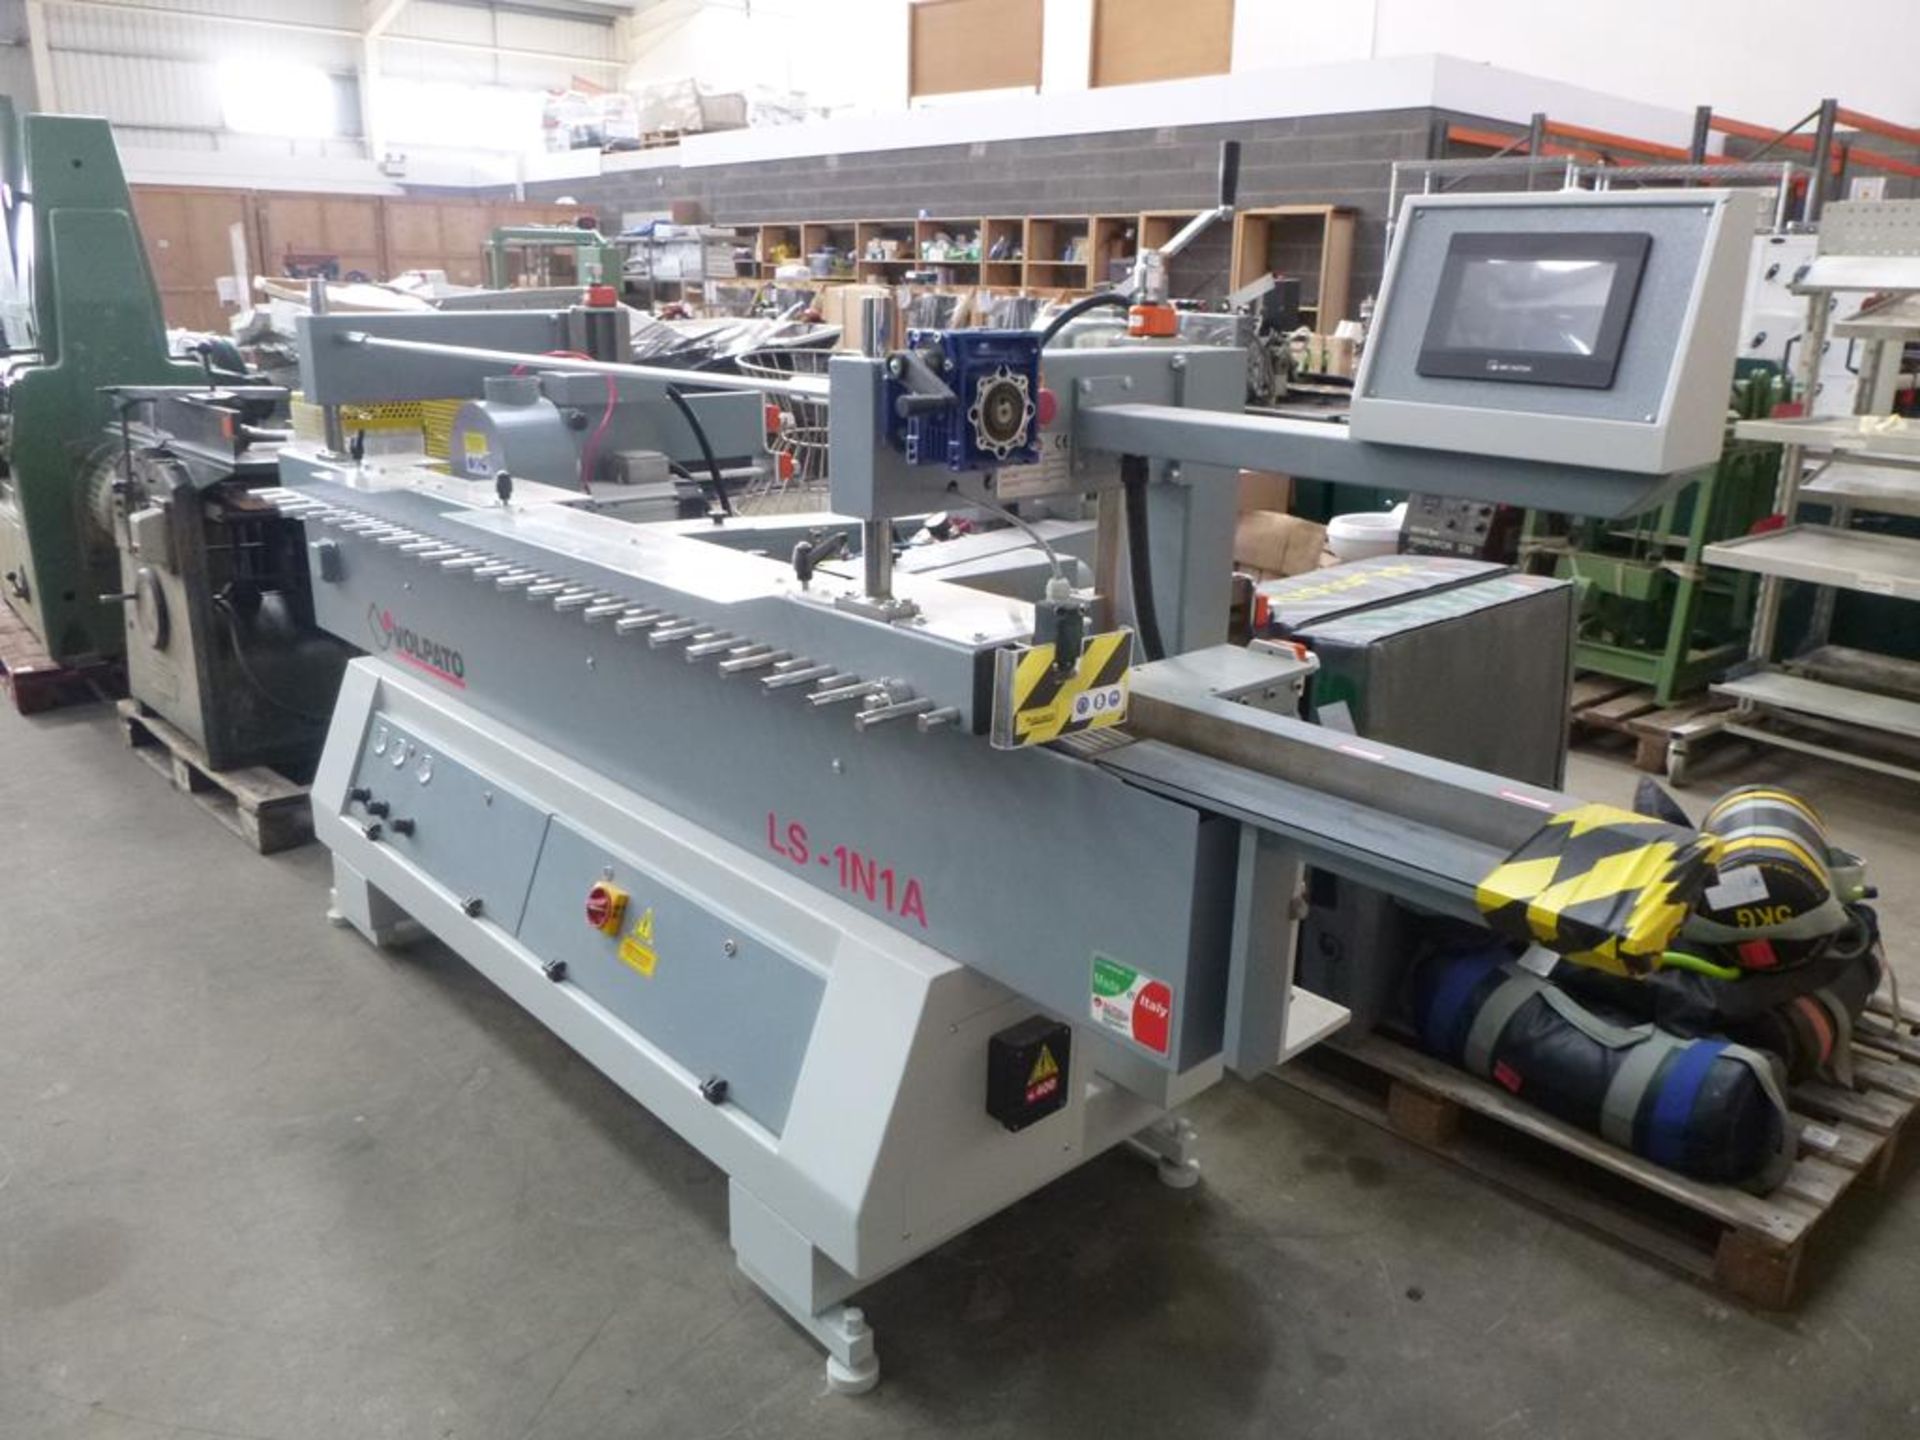 * Volpato LS1N Profile Sander. A 2016 Volpato Type LS1N-1-NA Profile Sander s/n V16-061-LS1N-1-NA - Image 4 of 8